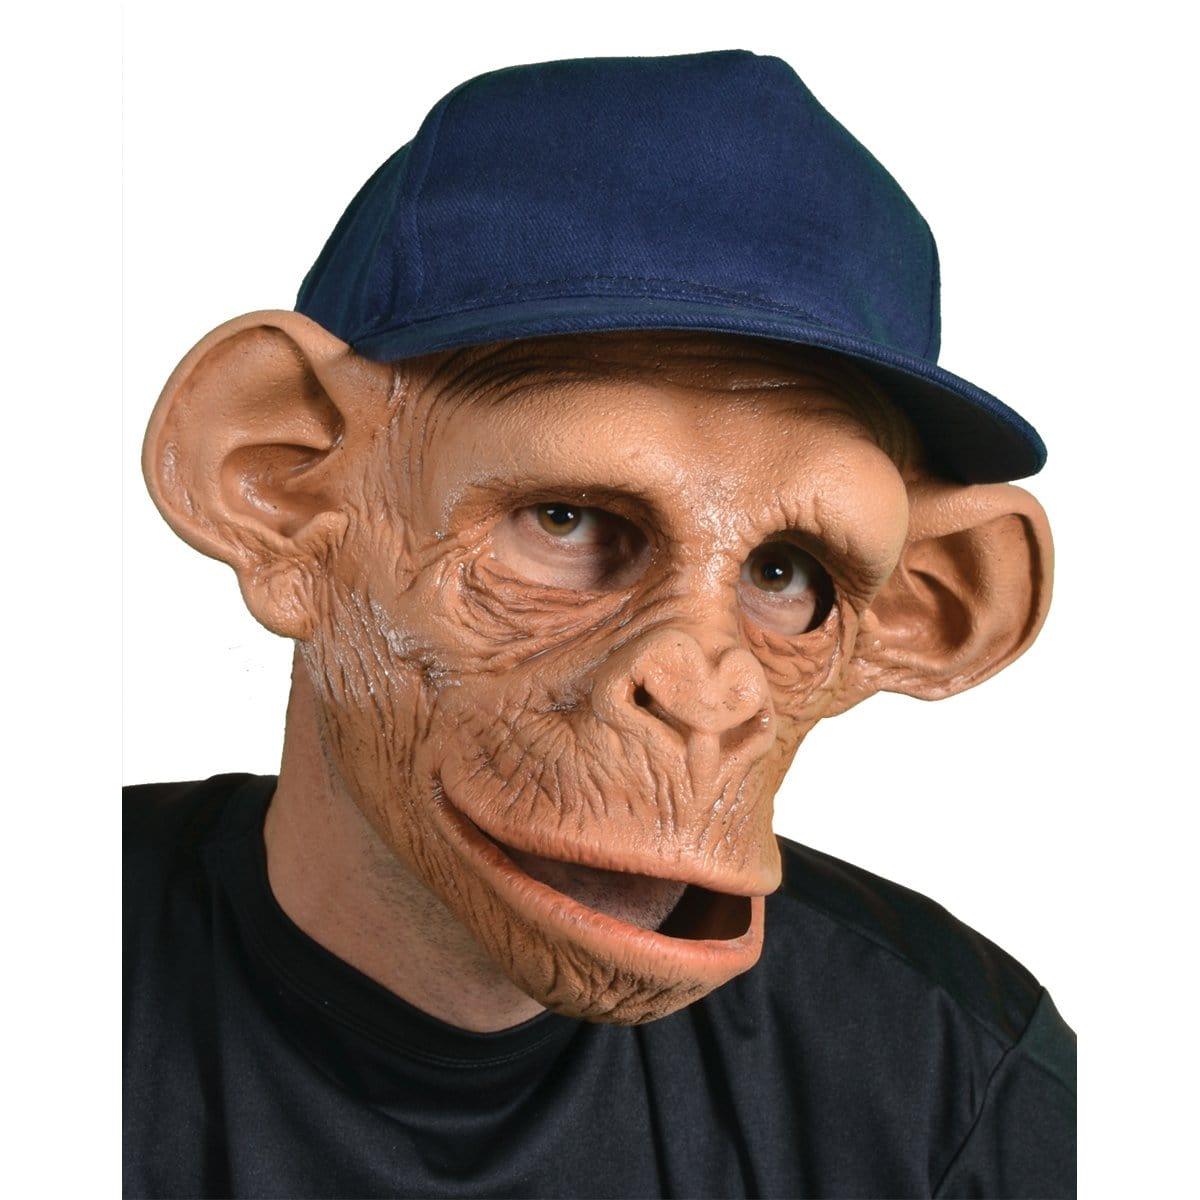 Buy Costume Accessories Chee Chee monkey mask sold at Party Expert